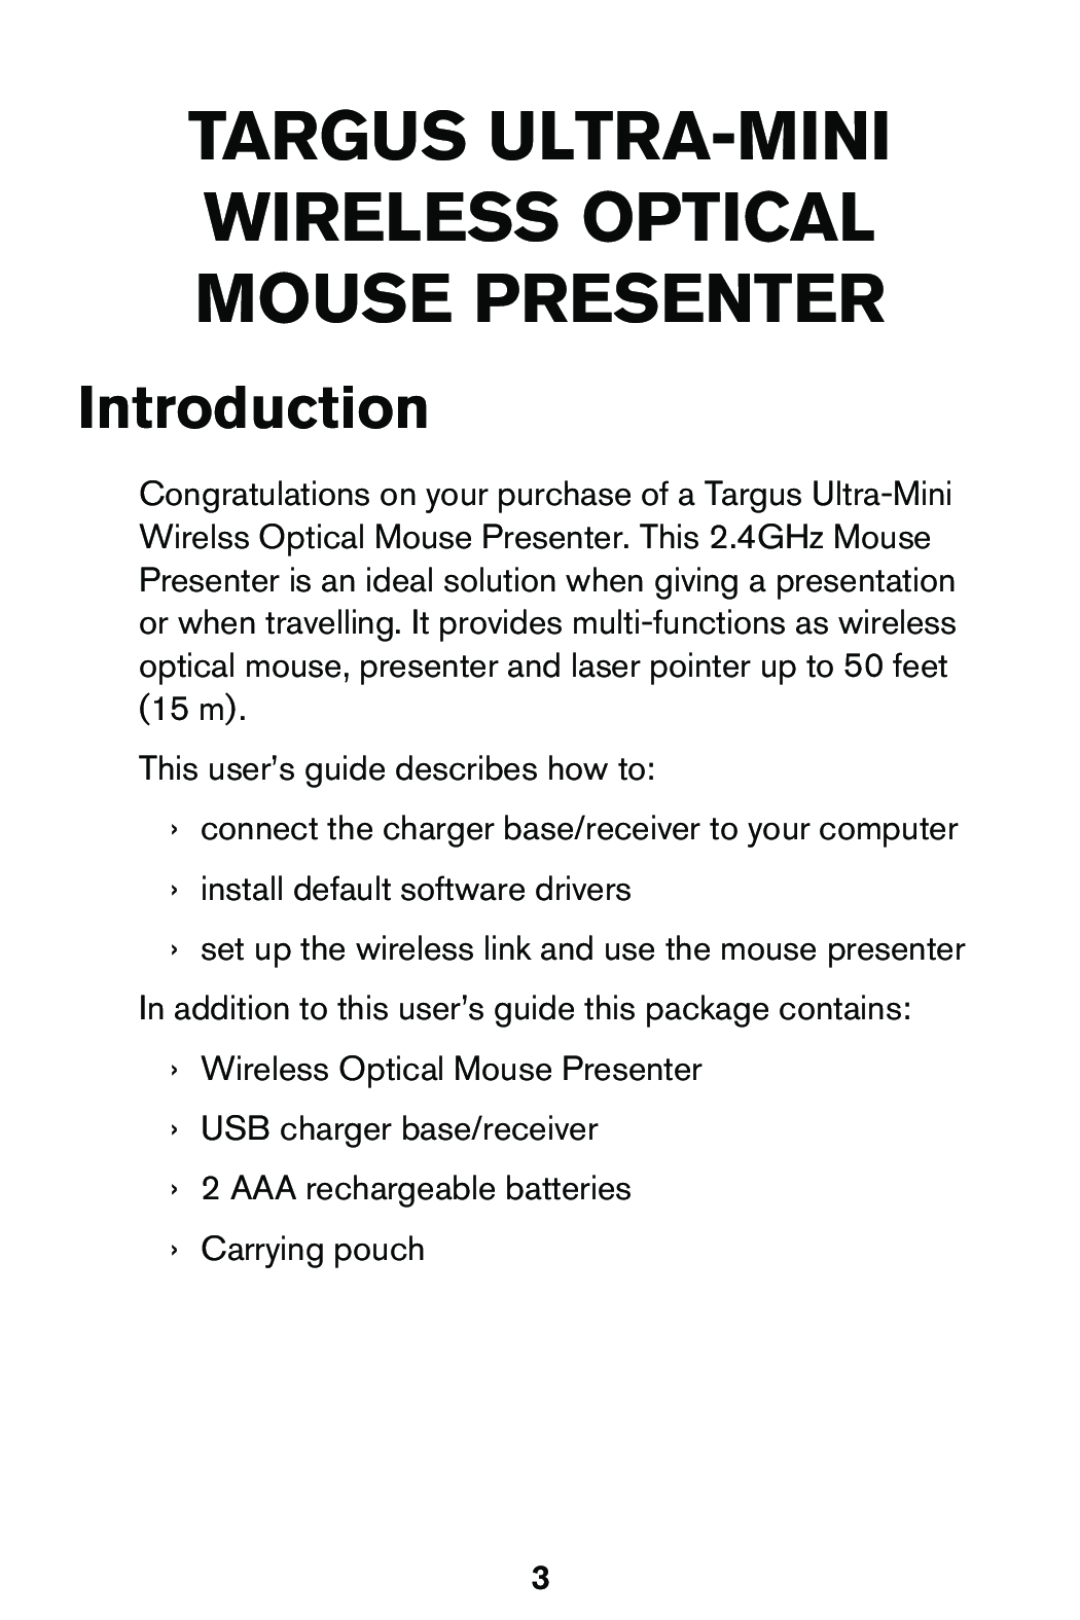 Targus 400-0140-001A specifications Introduction, Targus Ultra-Mini Wireless Optical Mouse Presenter 